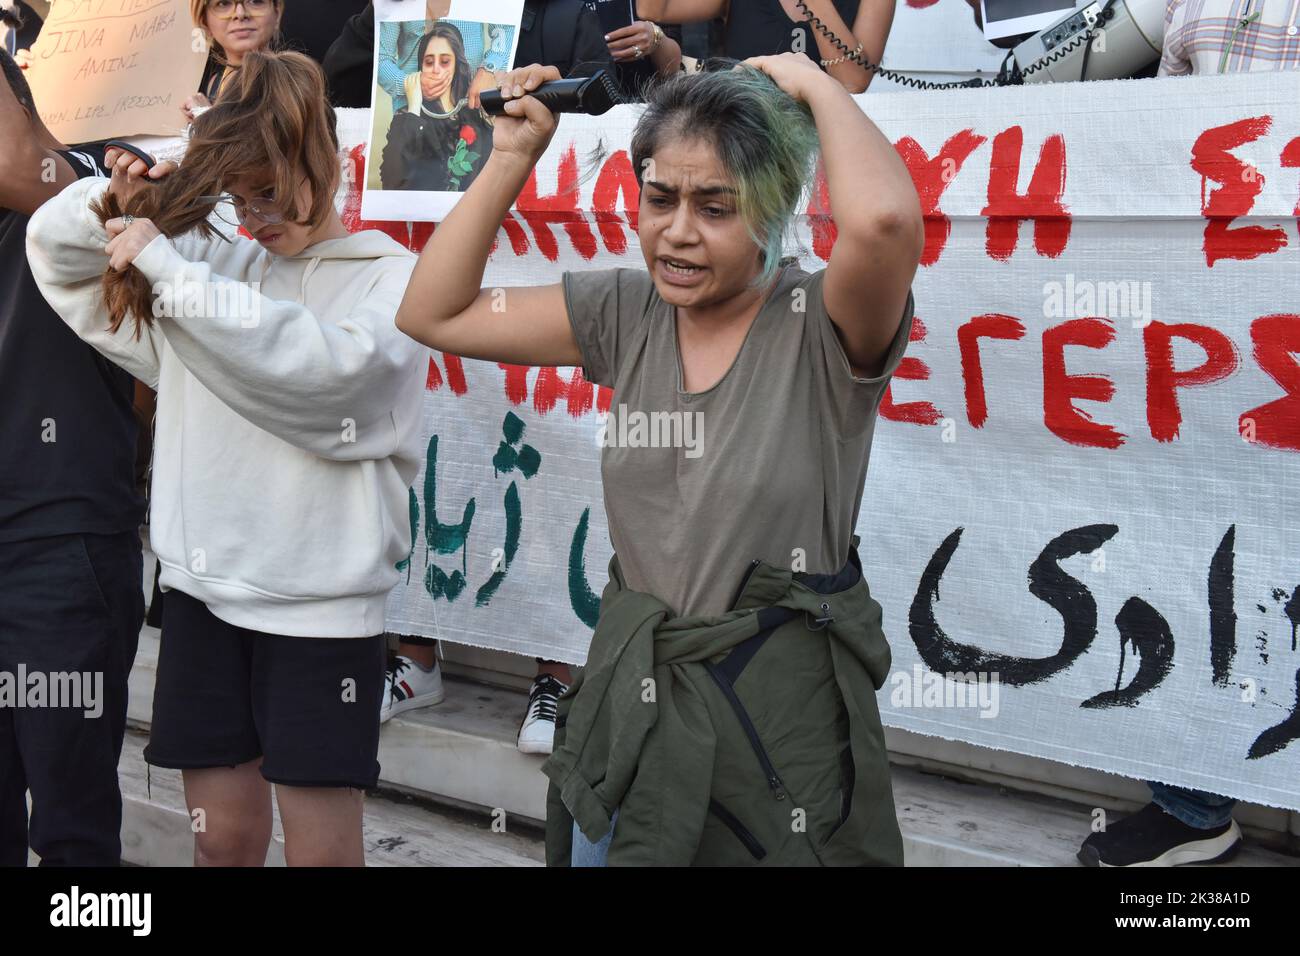 Athens, Greece. 24th September 2022. Two women cut their hair during a protest over the death of 22-year-old Iranian woman Mahsa Amini after being detained by morality police in Tehran for violating hijab rules. Credit: Nicolas Koutsokostas/Alamy Stock Photo. Stock Photo